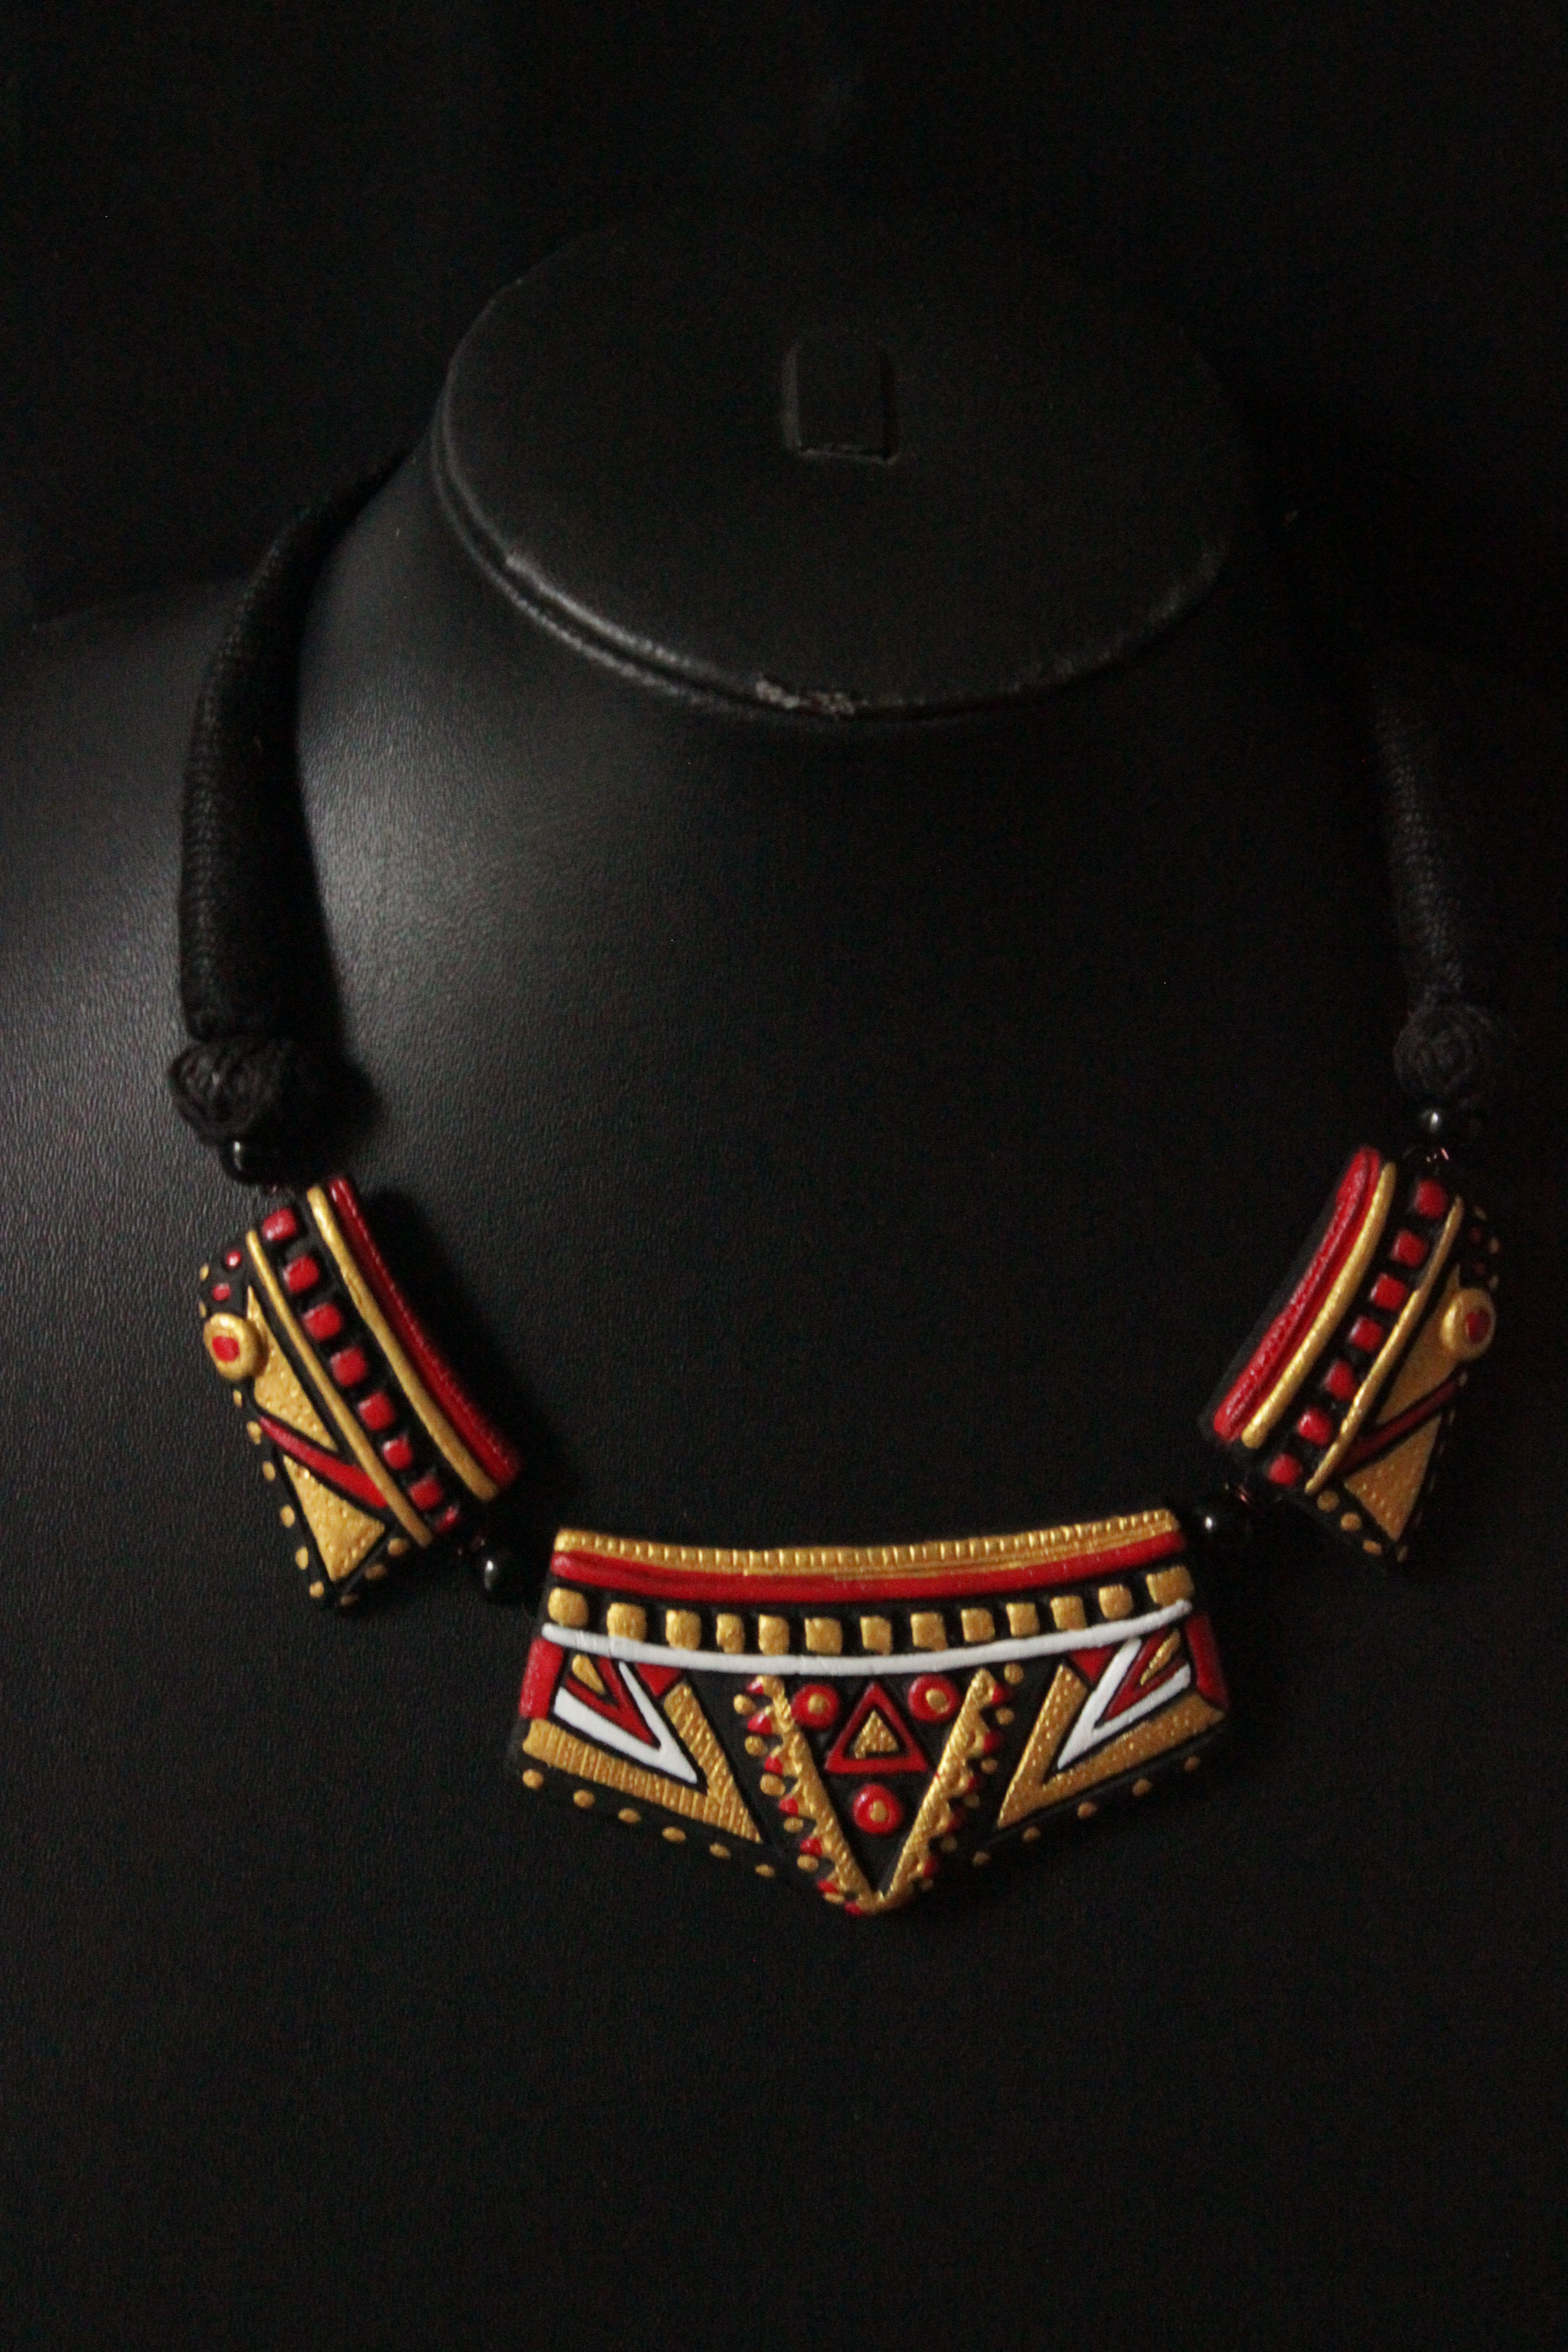 Elegant Black & Golden Handcrafted Terracotta Clay Necklace Set with Thread Closure